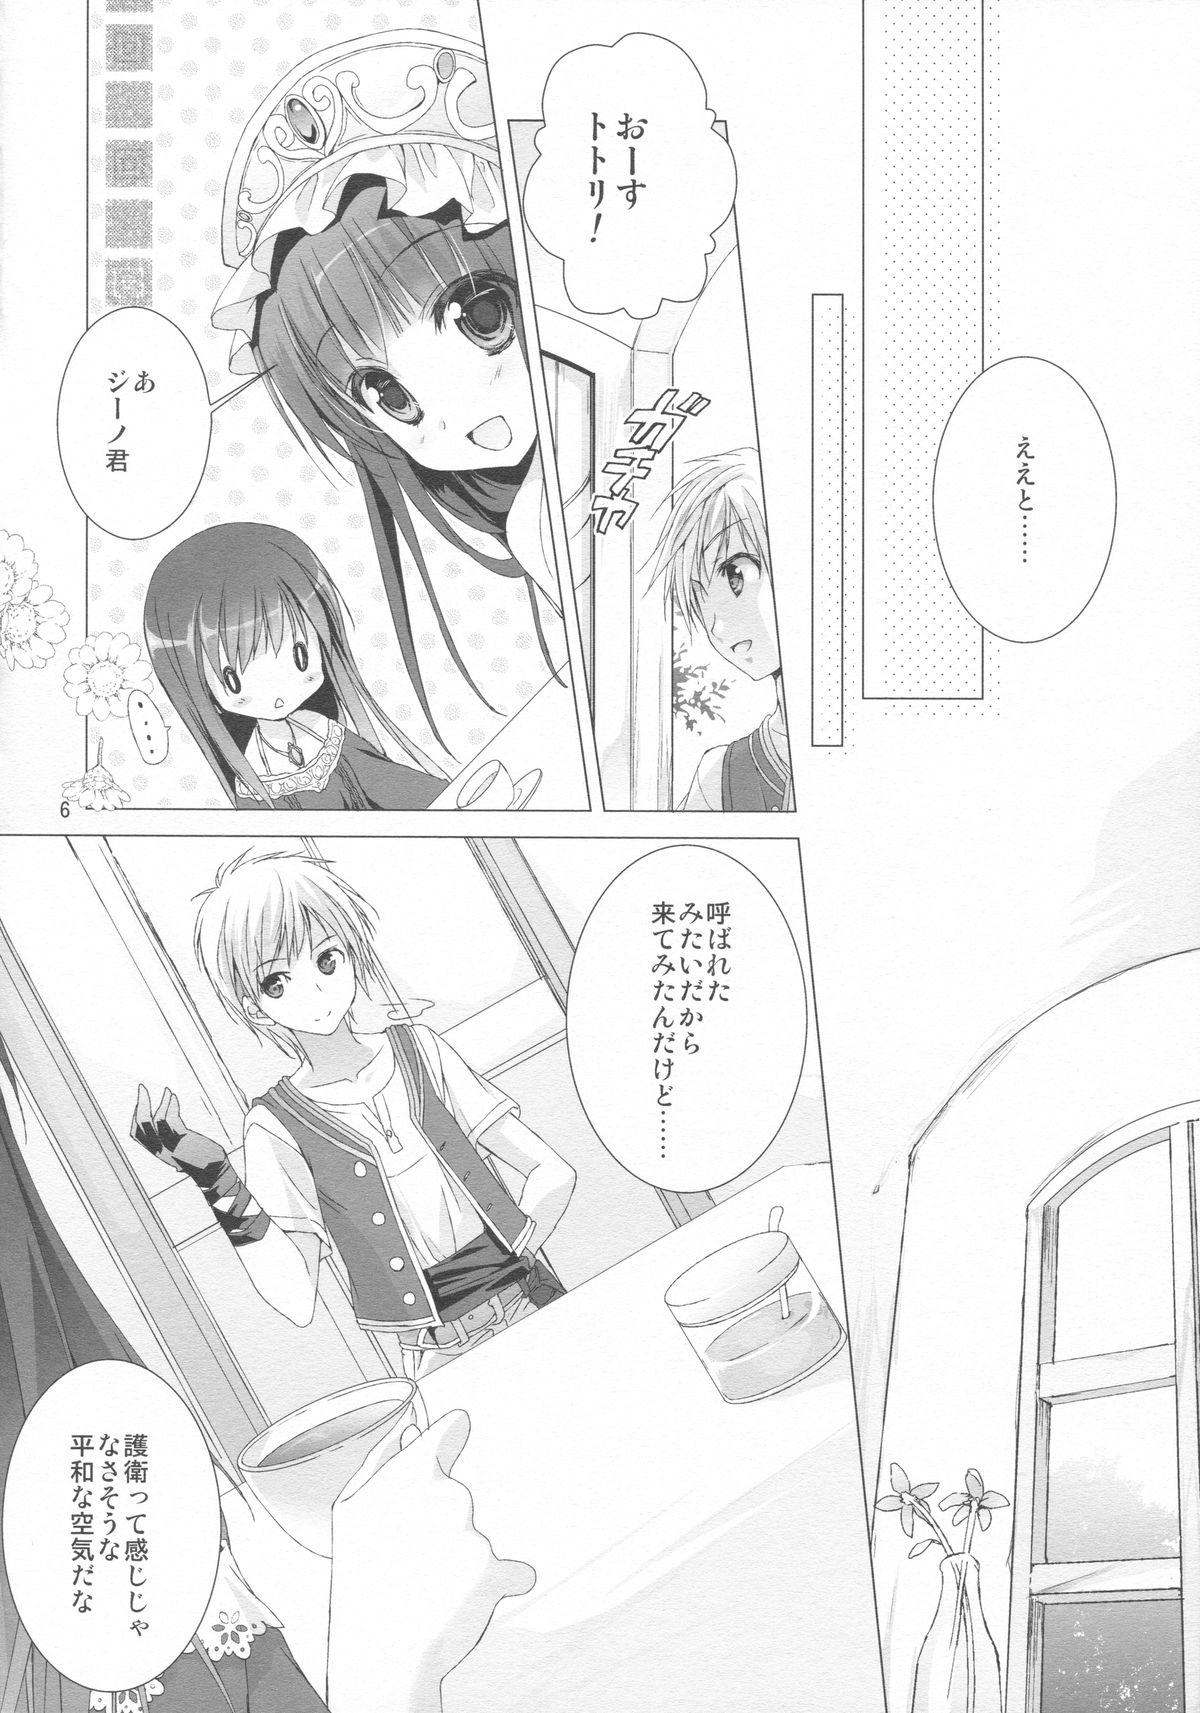 Audition 2-Shuume no True End - Atelier totori Sweet - Page 4